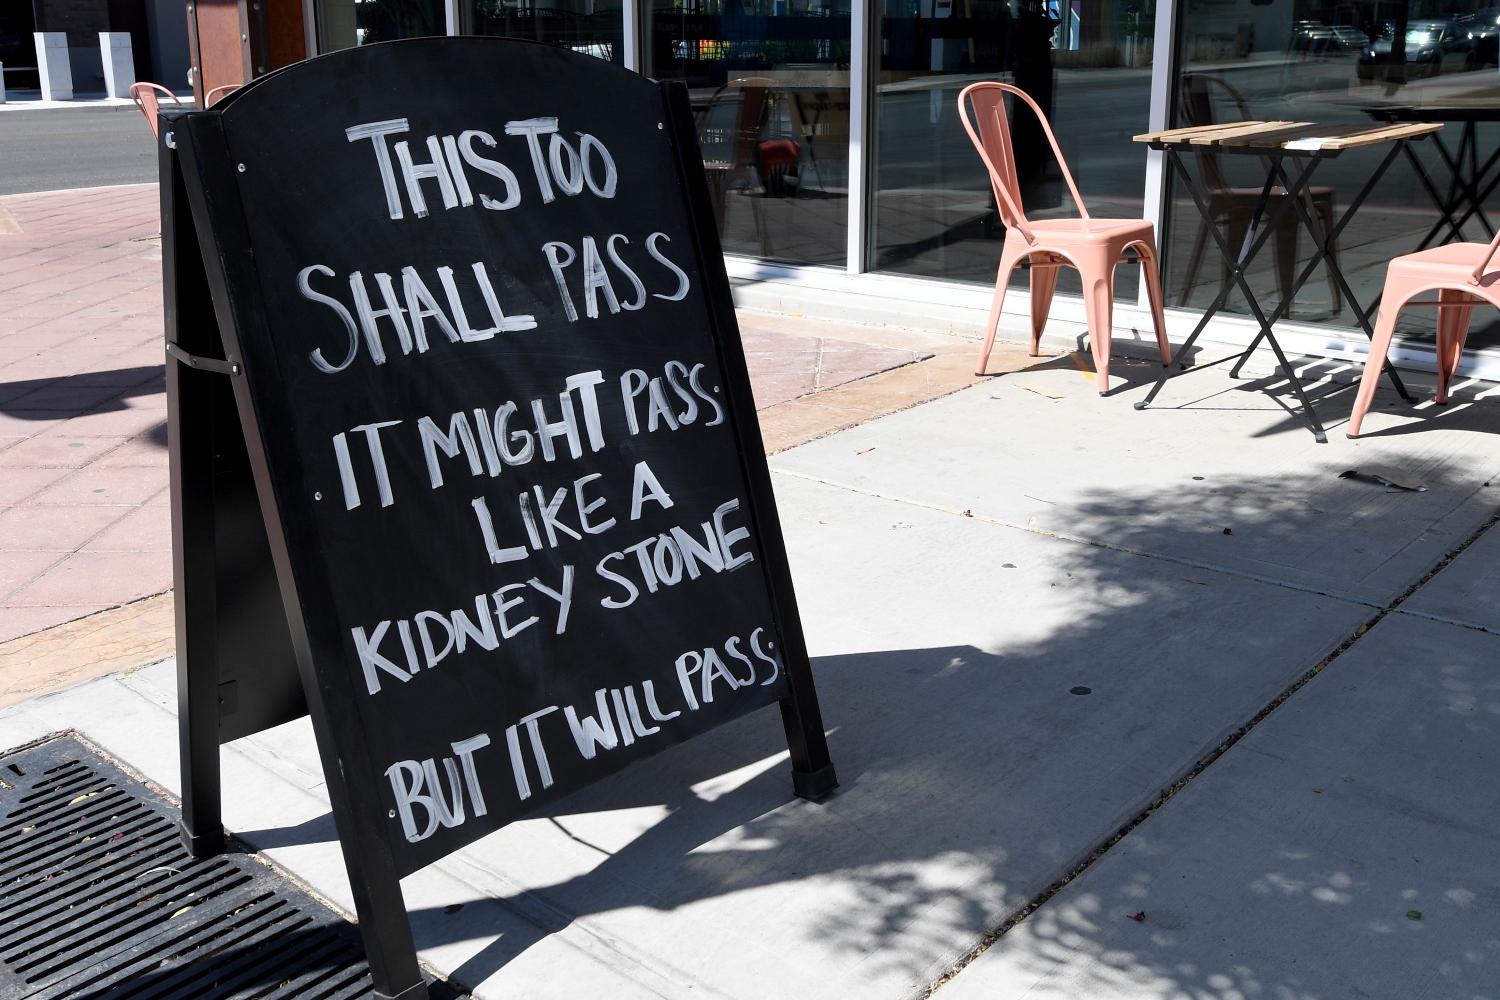 Chalkboard sign on sidewalk reads "This too shall pass. It might pass like a kidney stone, but it will pass." We take a look at whether kidney stones are more painful than childbirth.